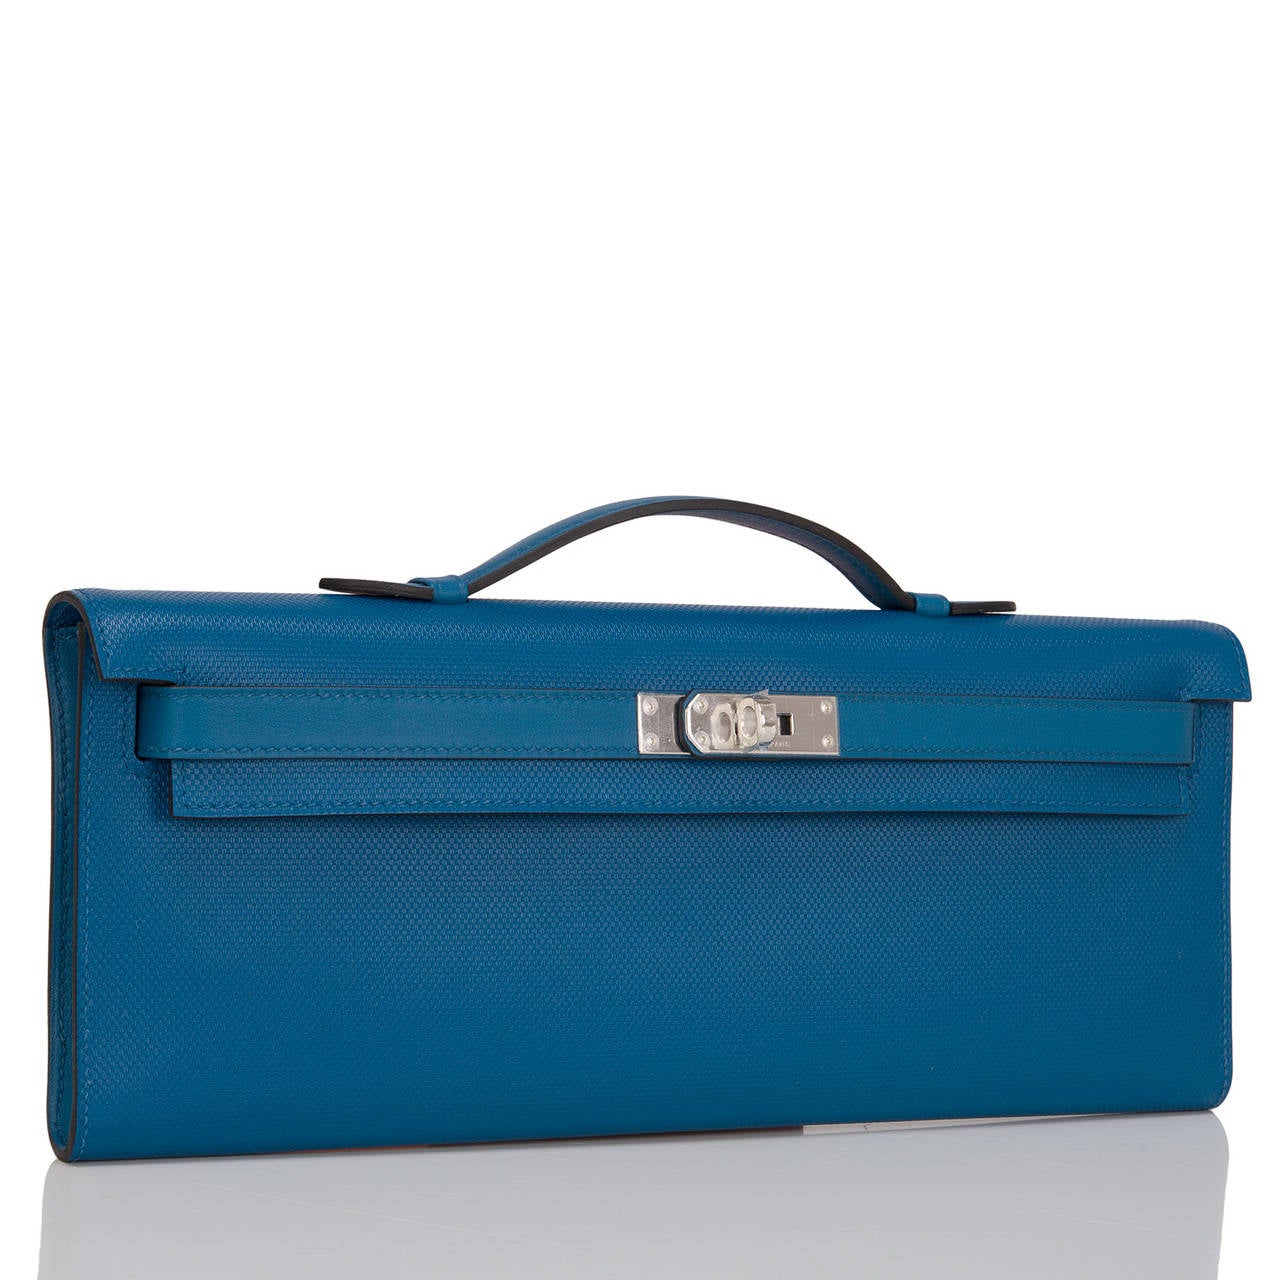 This Hermes Kelly Cut in Blue de Galice is gorgeous in Veau Grain d'H leather that is elegant with palladium hardware; the bag has tonal stitching, swift leather front straps with toggle closure and a top flat handle.

The interior is lined in